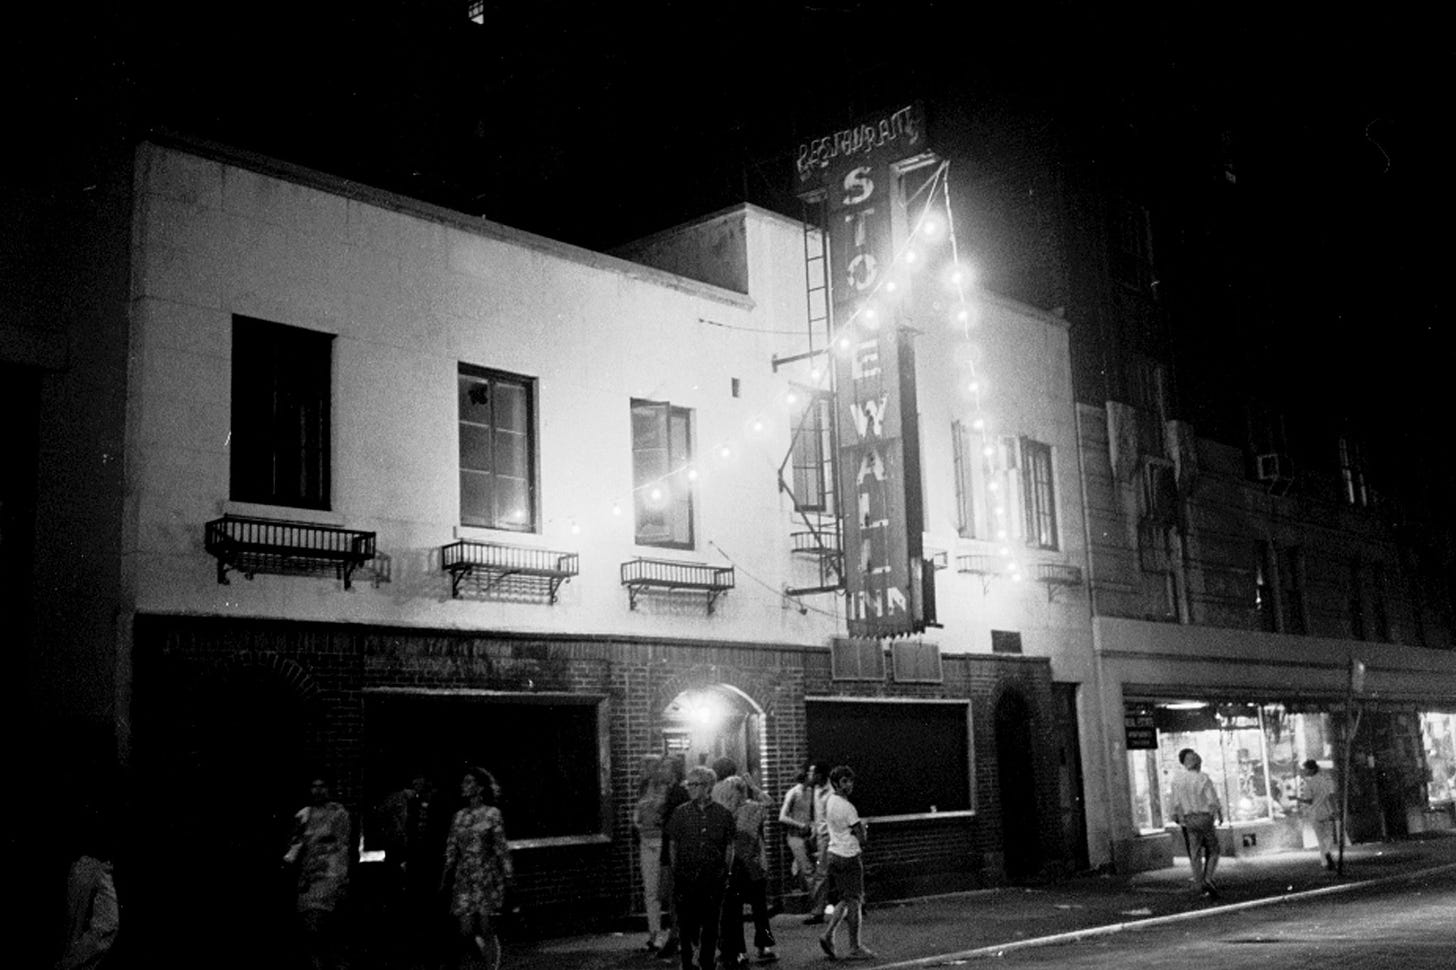 The Night the Stonewall Inn Became a Proud Shrine - The New York Times